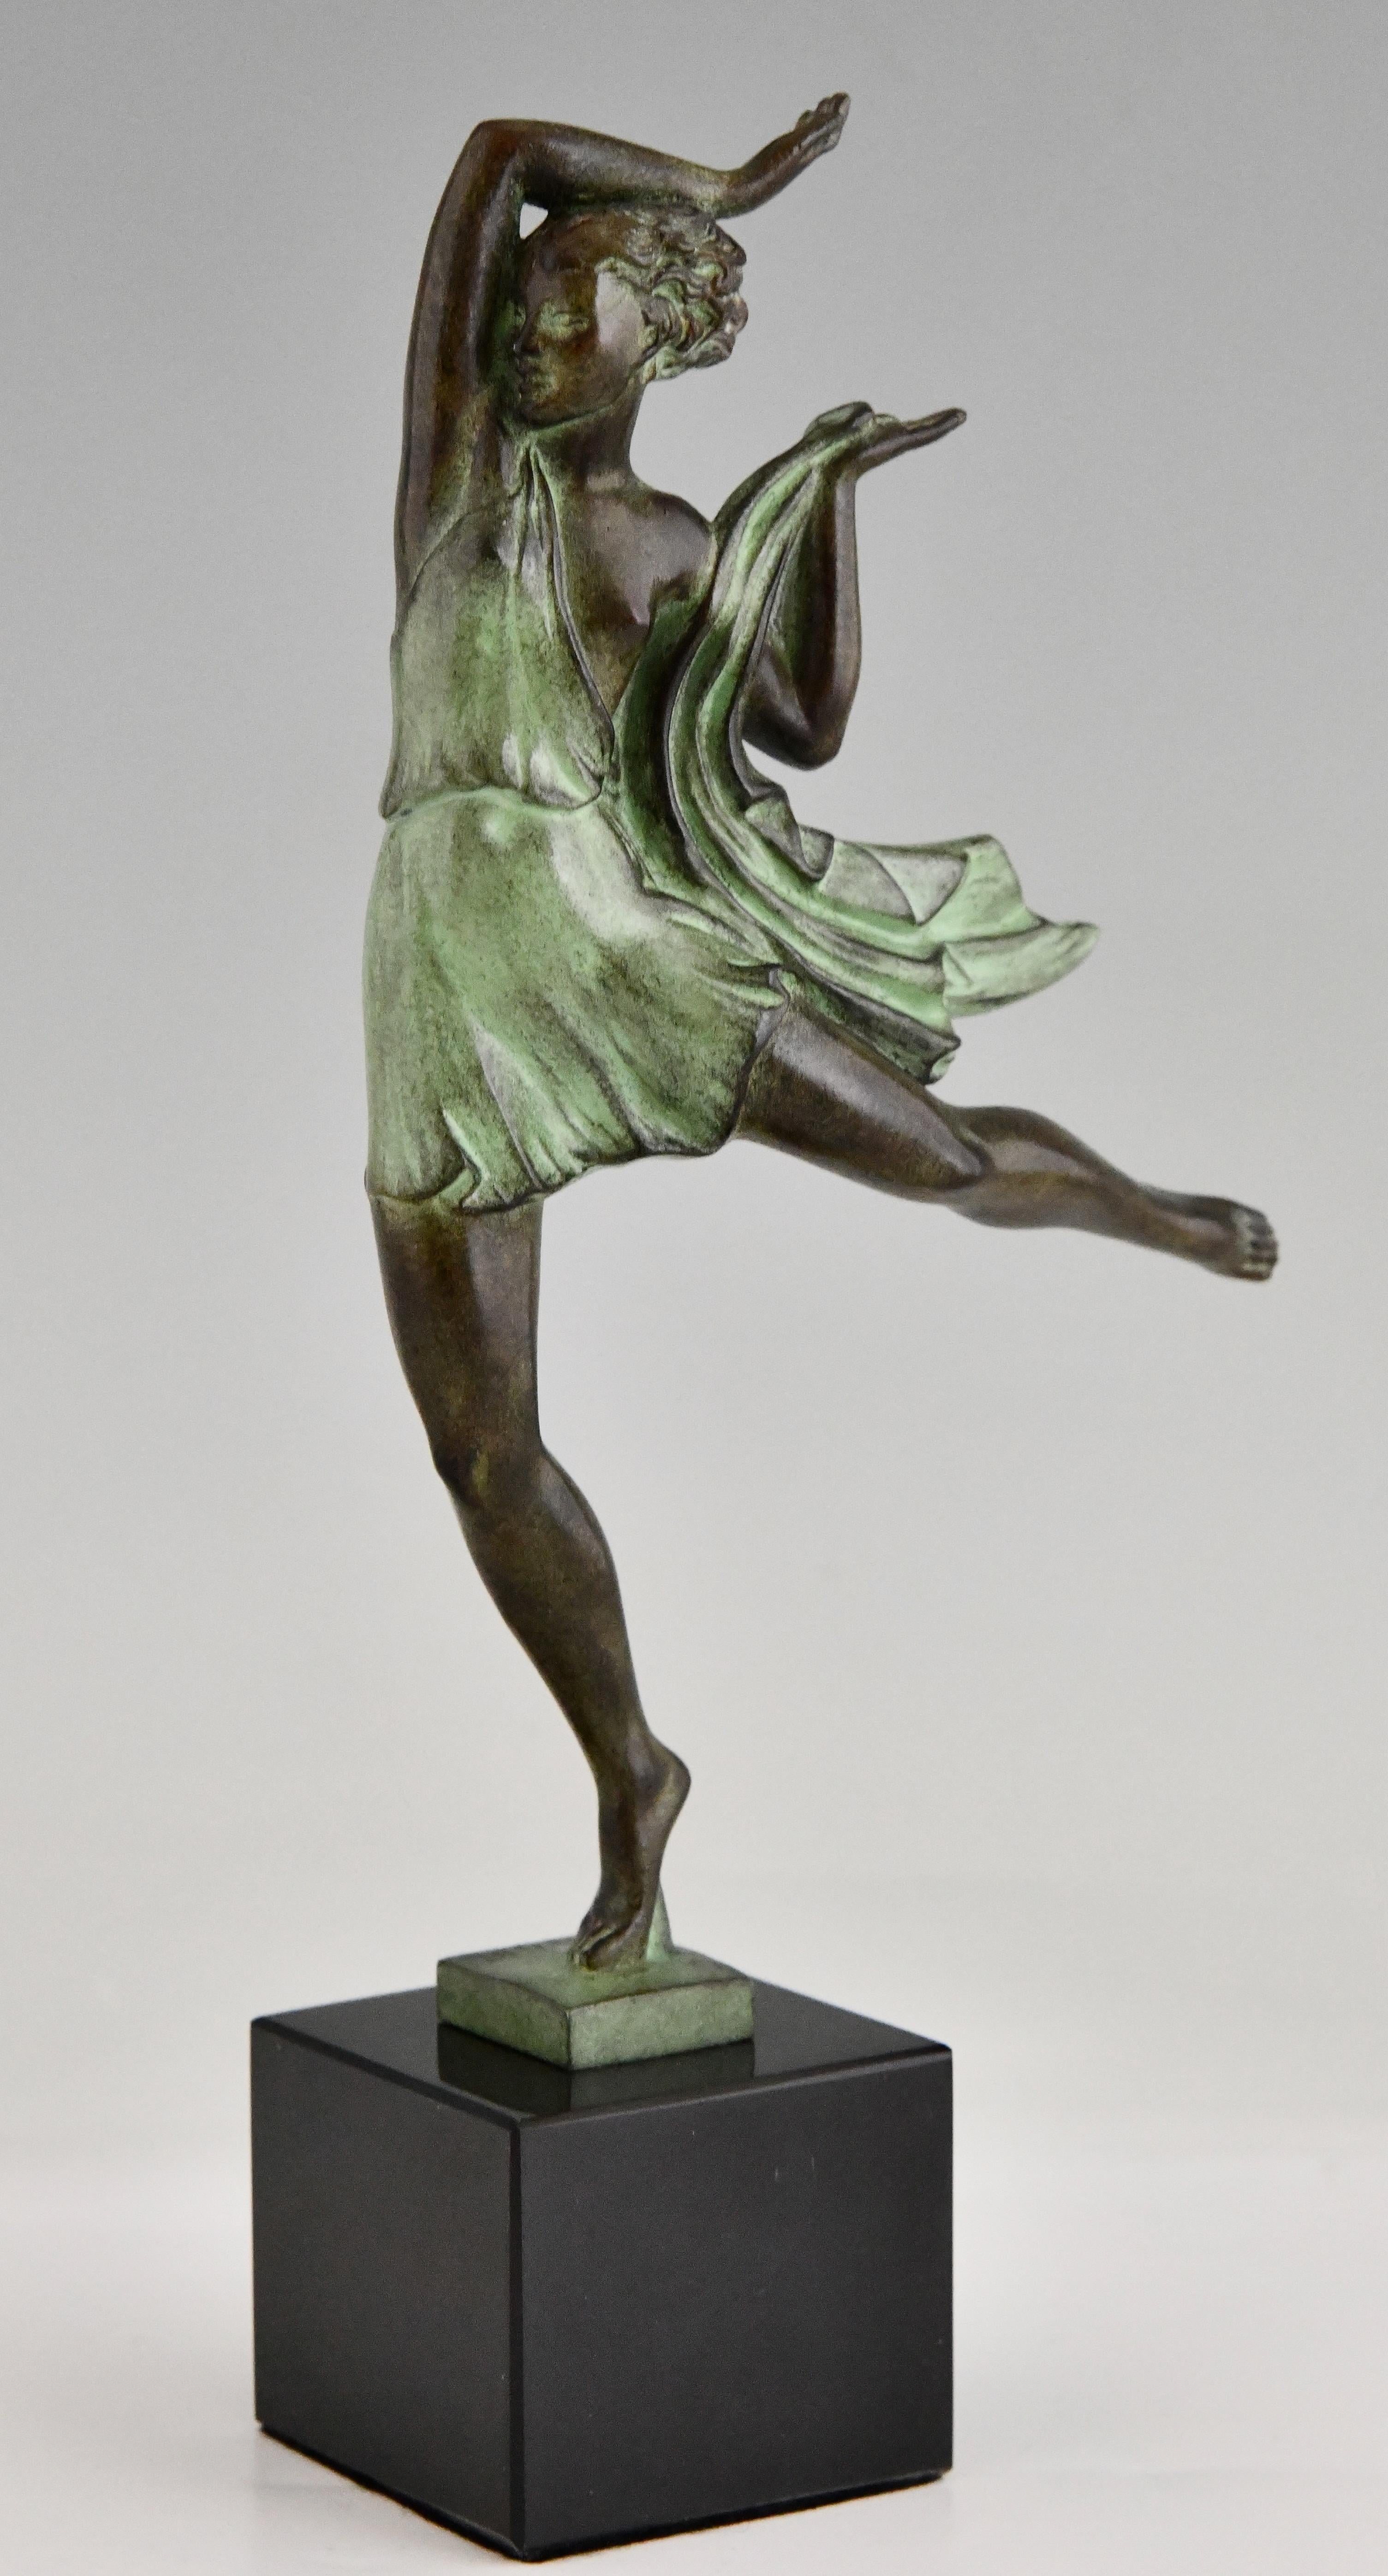 Art Deco style sculpture of a dancer Allegresse. 
Signed Fayral, pseudonym of Pierre Le Faguays.
With the Le Verrier foundry mark.
Design 1930.
Posthumous contemporary cast of the Le Verrier foundry. 
With Certificate of Authenticity.